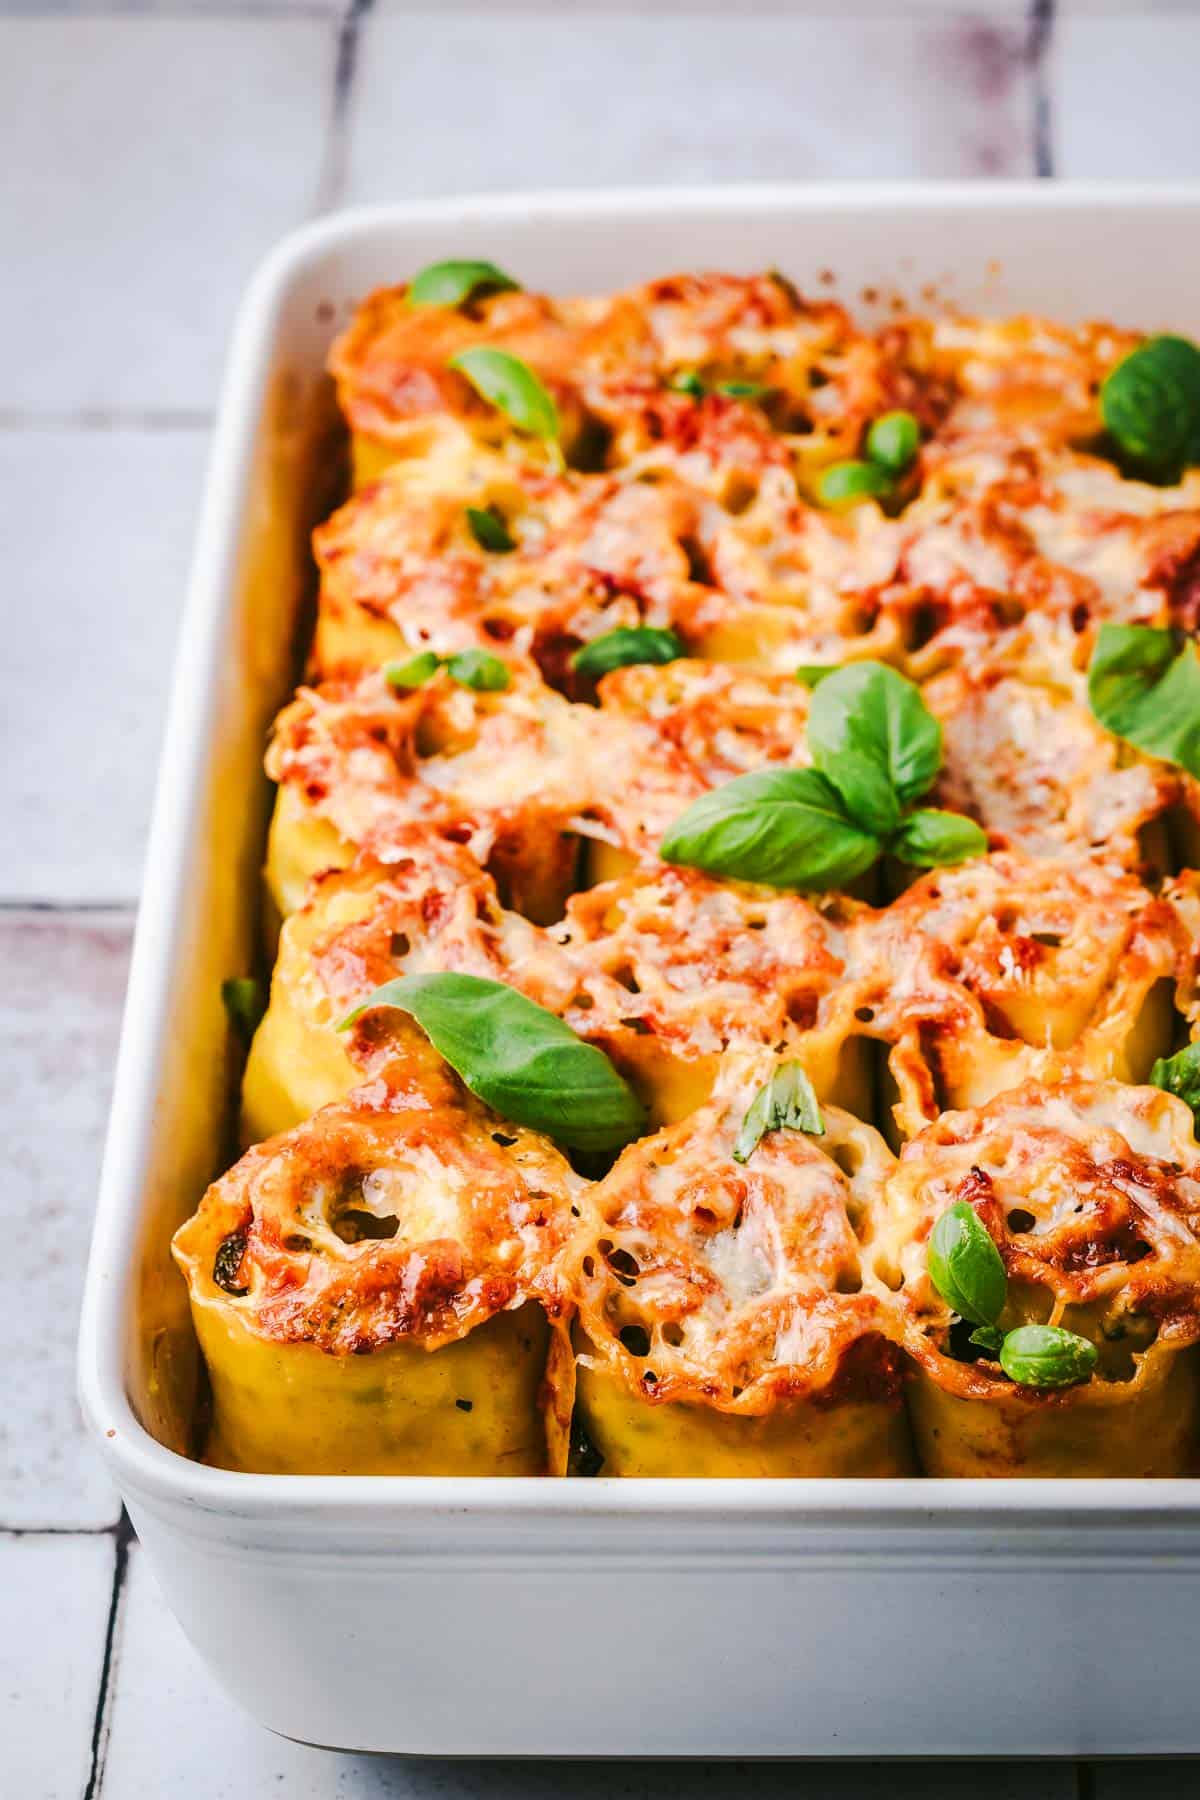 baked lasagna roll ups in a baking dish topped with basil leaves.